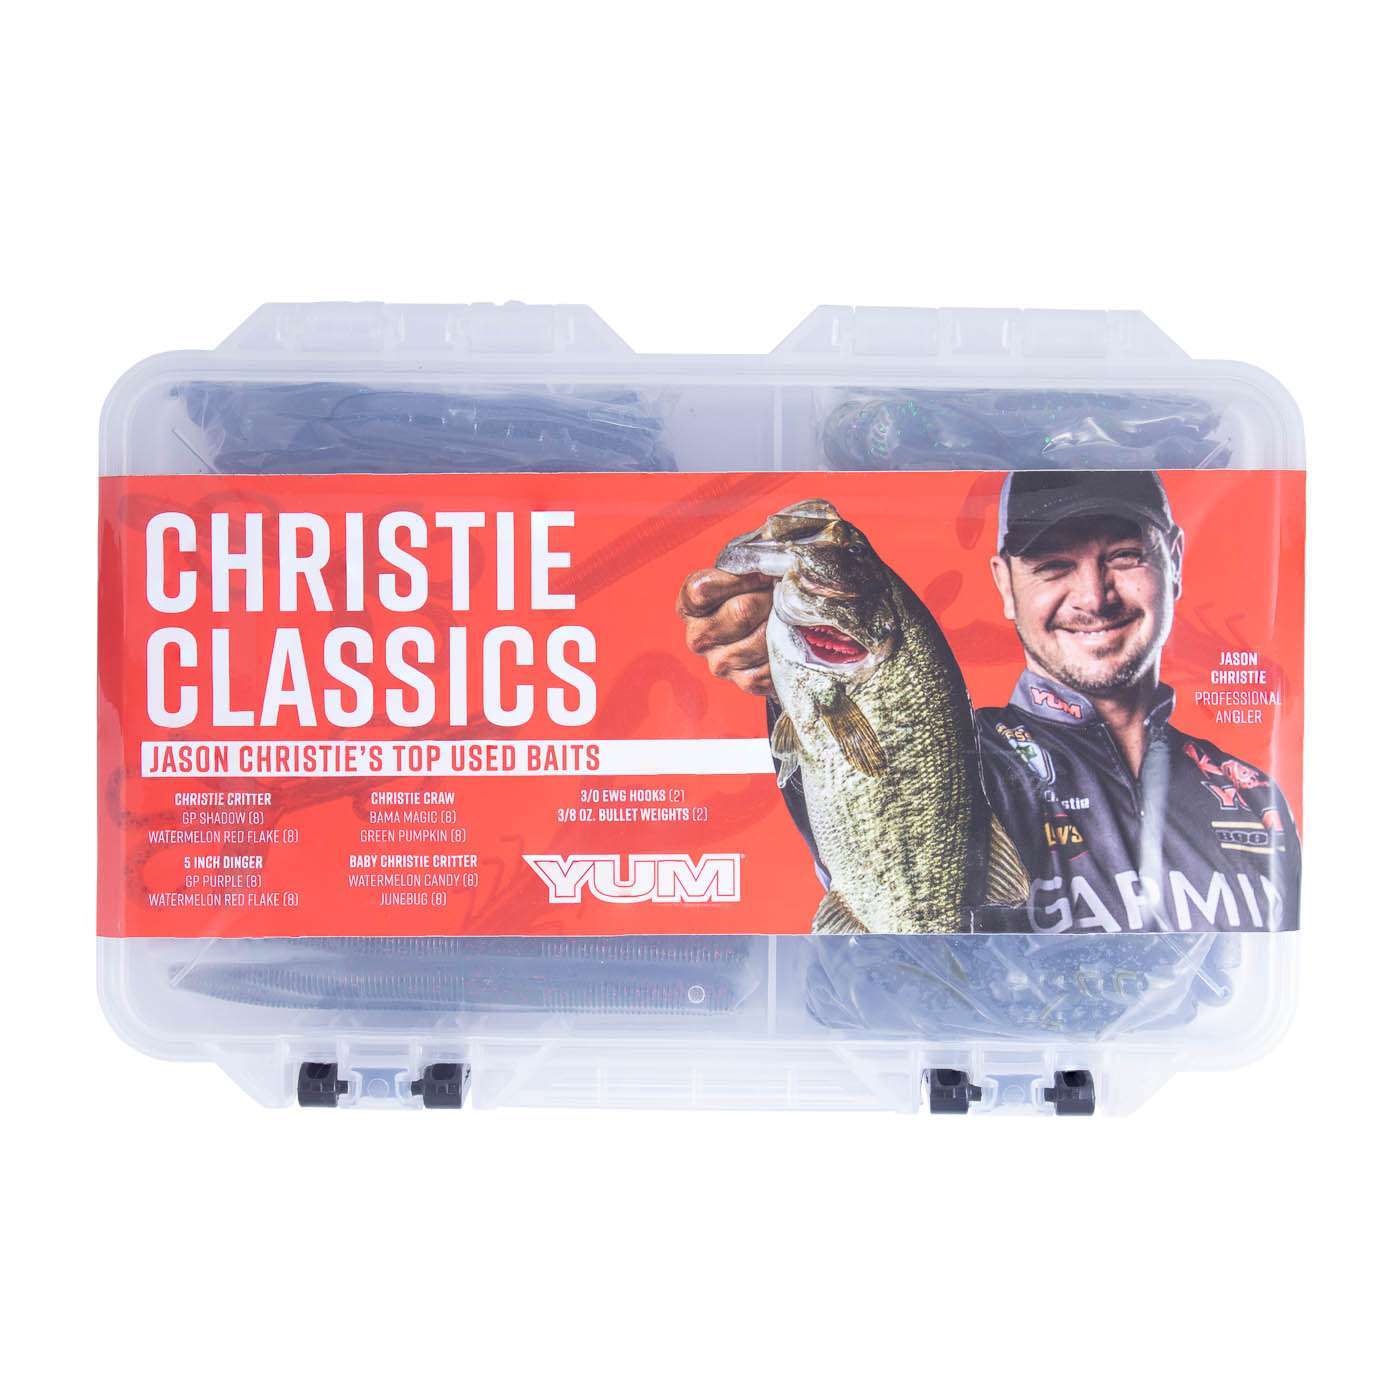 <p><strong>YUM Christie Classics</strong></p><p>Bassmaster Elite Series pro Jason Christie chose the lure lineup for his new YUM Multikit. Encased in a quality tackle box is Christieâs favorite soft plastic options such as the Christie Critter, Christie Craw, YUM Dingers and an ample number of hooks and sinkers to rig his favorites. <a href=